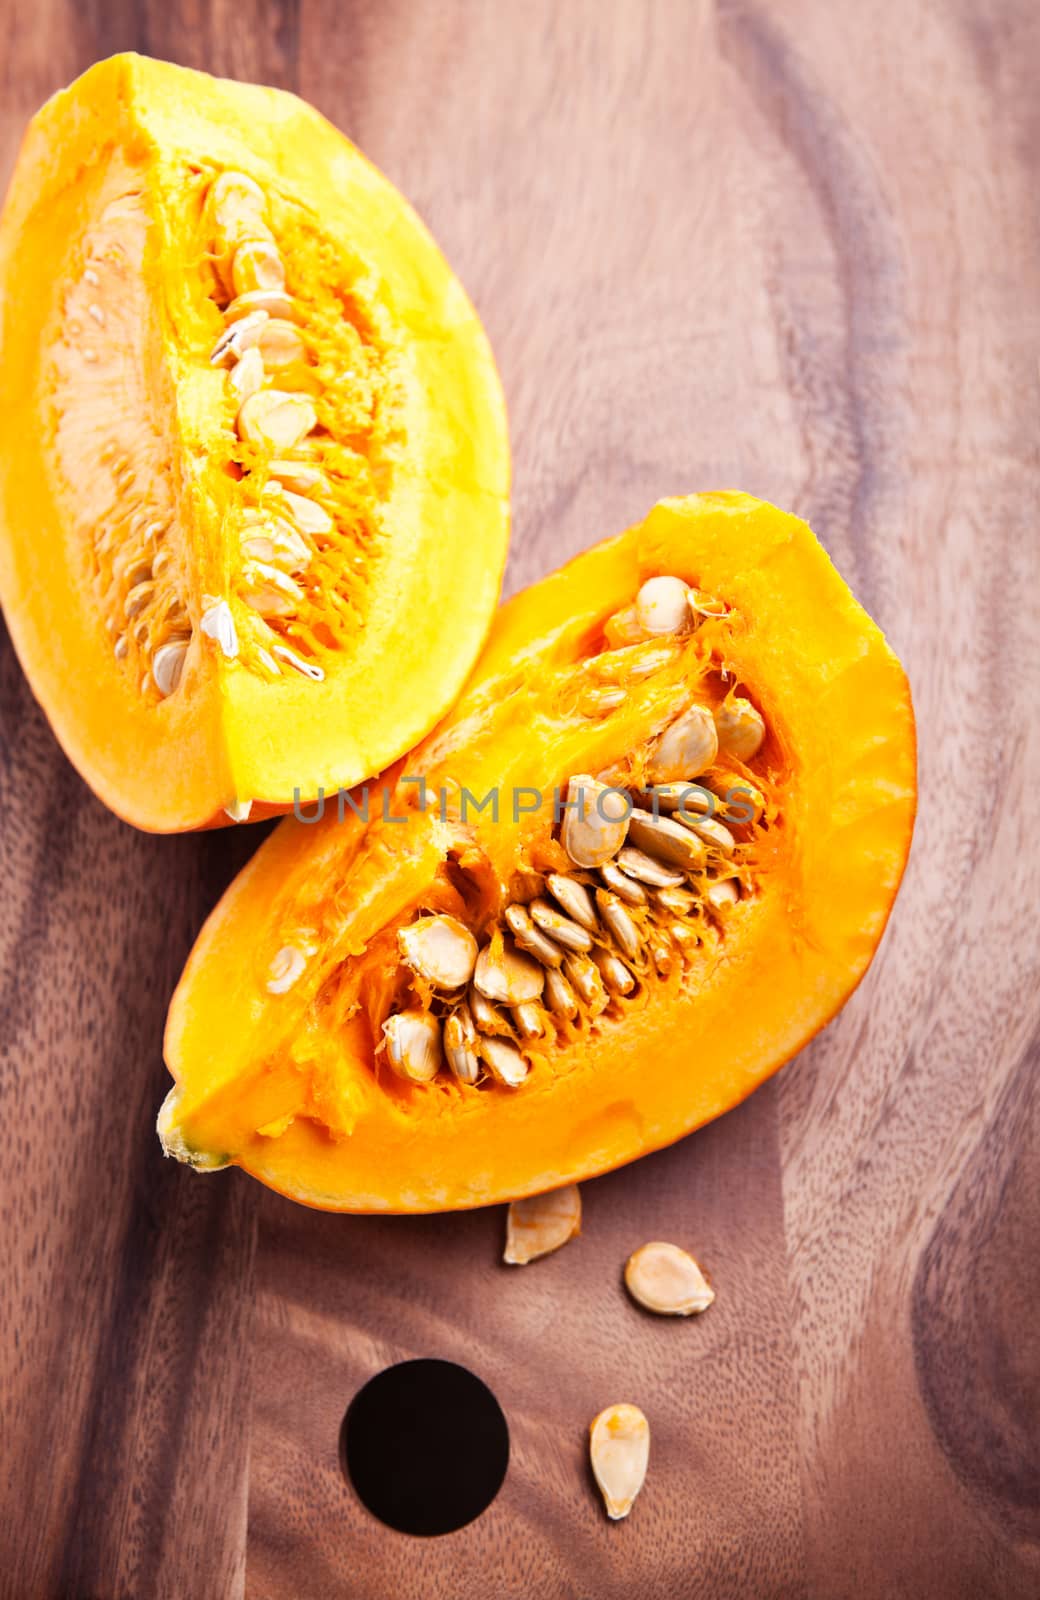 A slice of fresh Pumpkin on wooden table